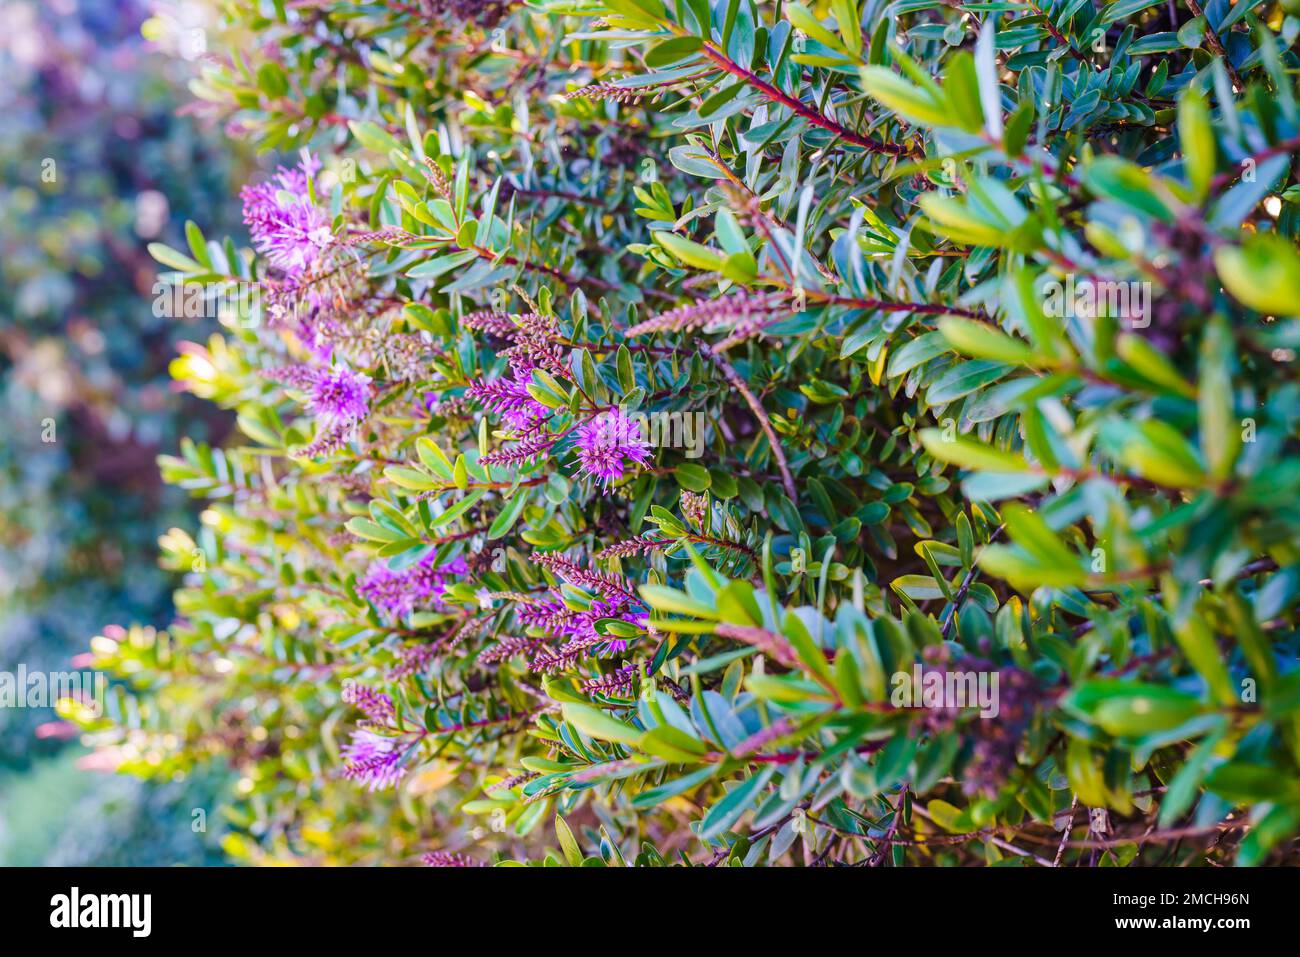 The shrub veronica or hebe plant, ornamental plant with beautiful pink-purple flowers, close-up in the garden in sunny day Stock Photo